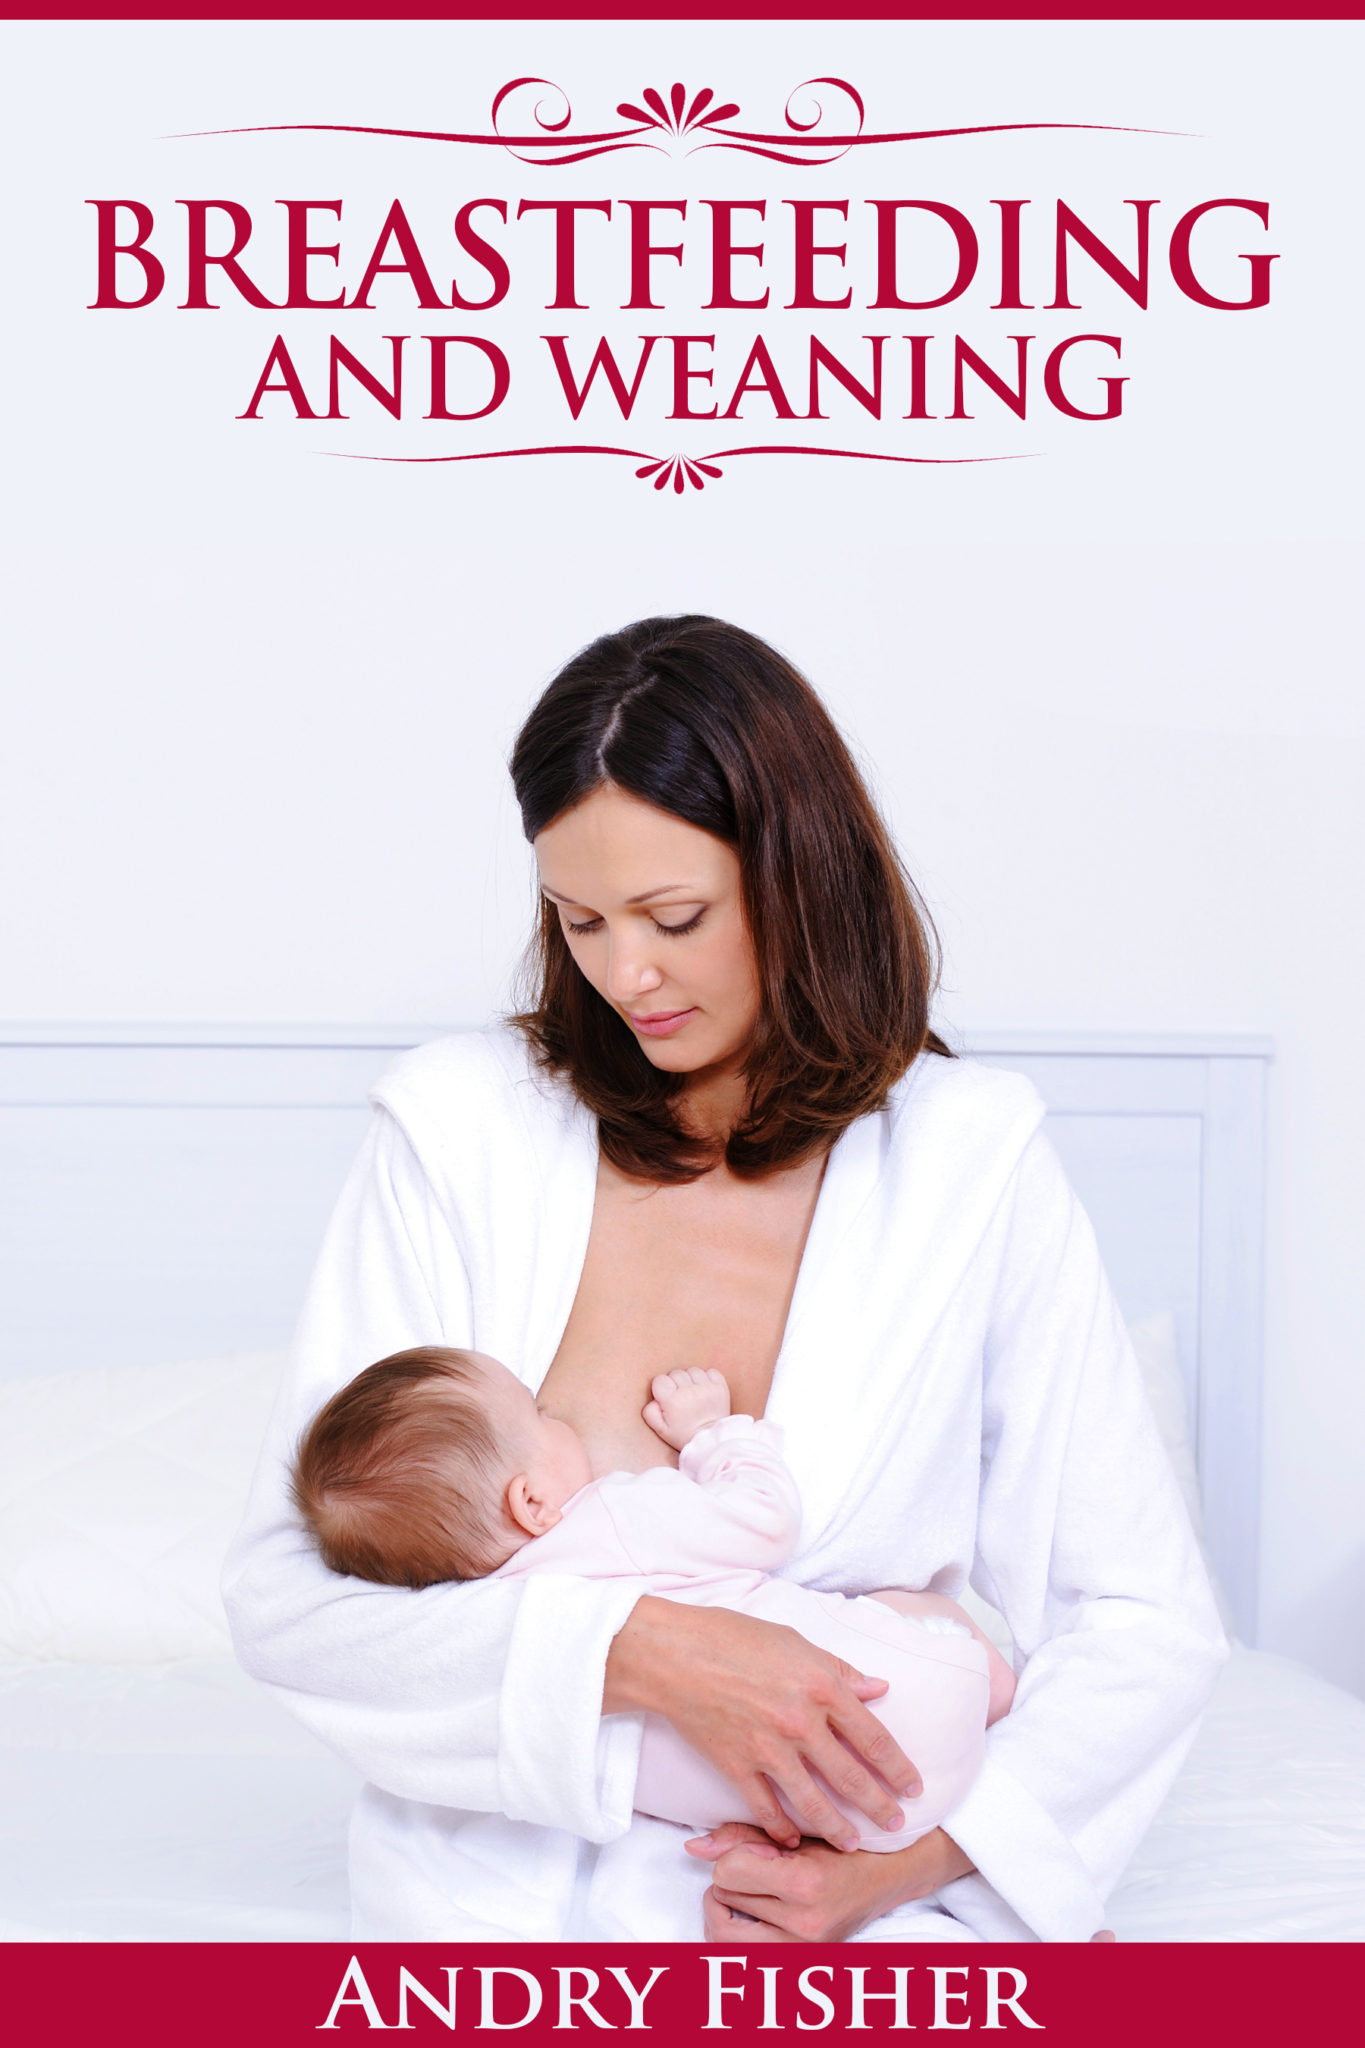 FREE: Breastfeeding to Weaning: a Step by Step Guide for Transferring Your Child to Adult Food by Andry Fisher